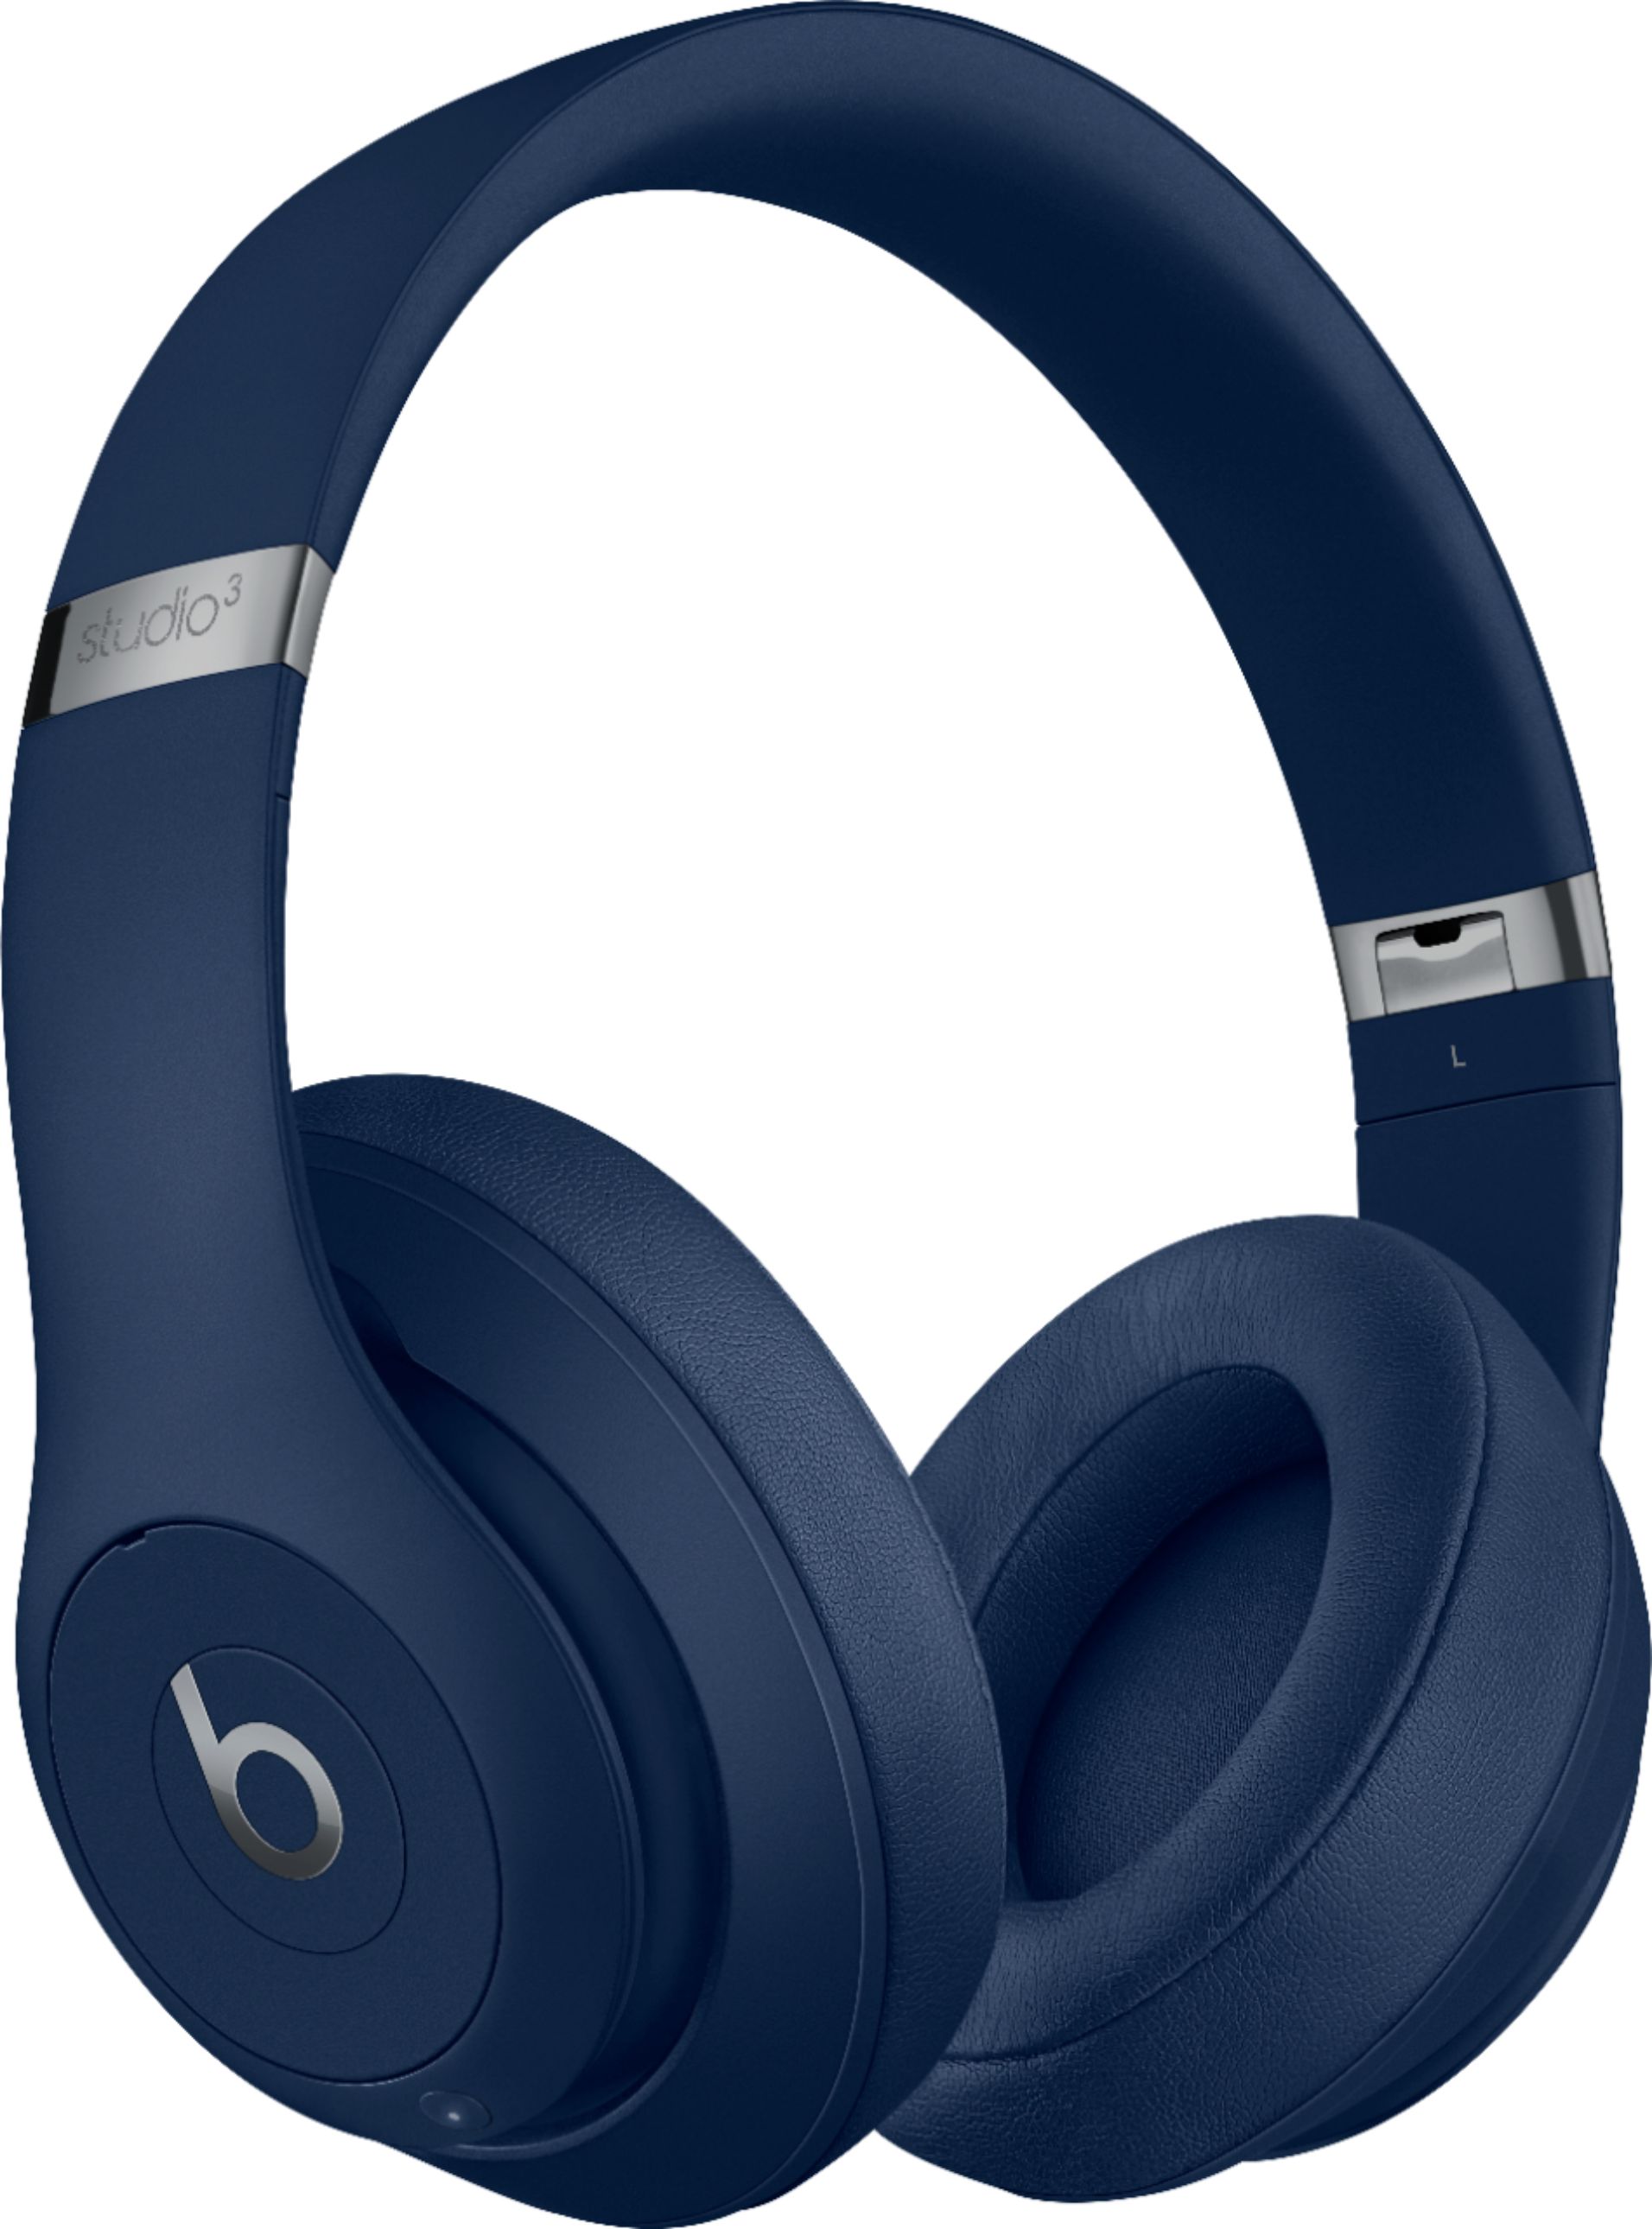 Beats Studio³ Wireless Noise Cancelling Headphones Blue MQCY2LL/A - Best Buy